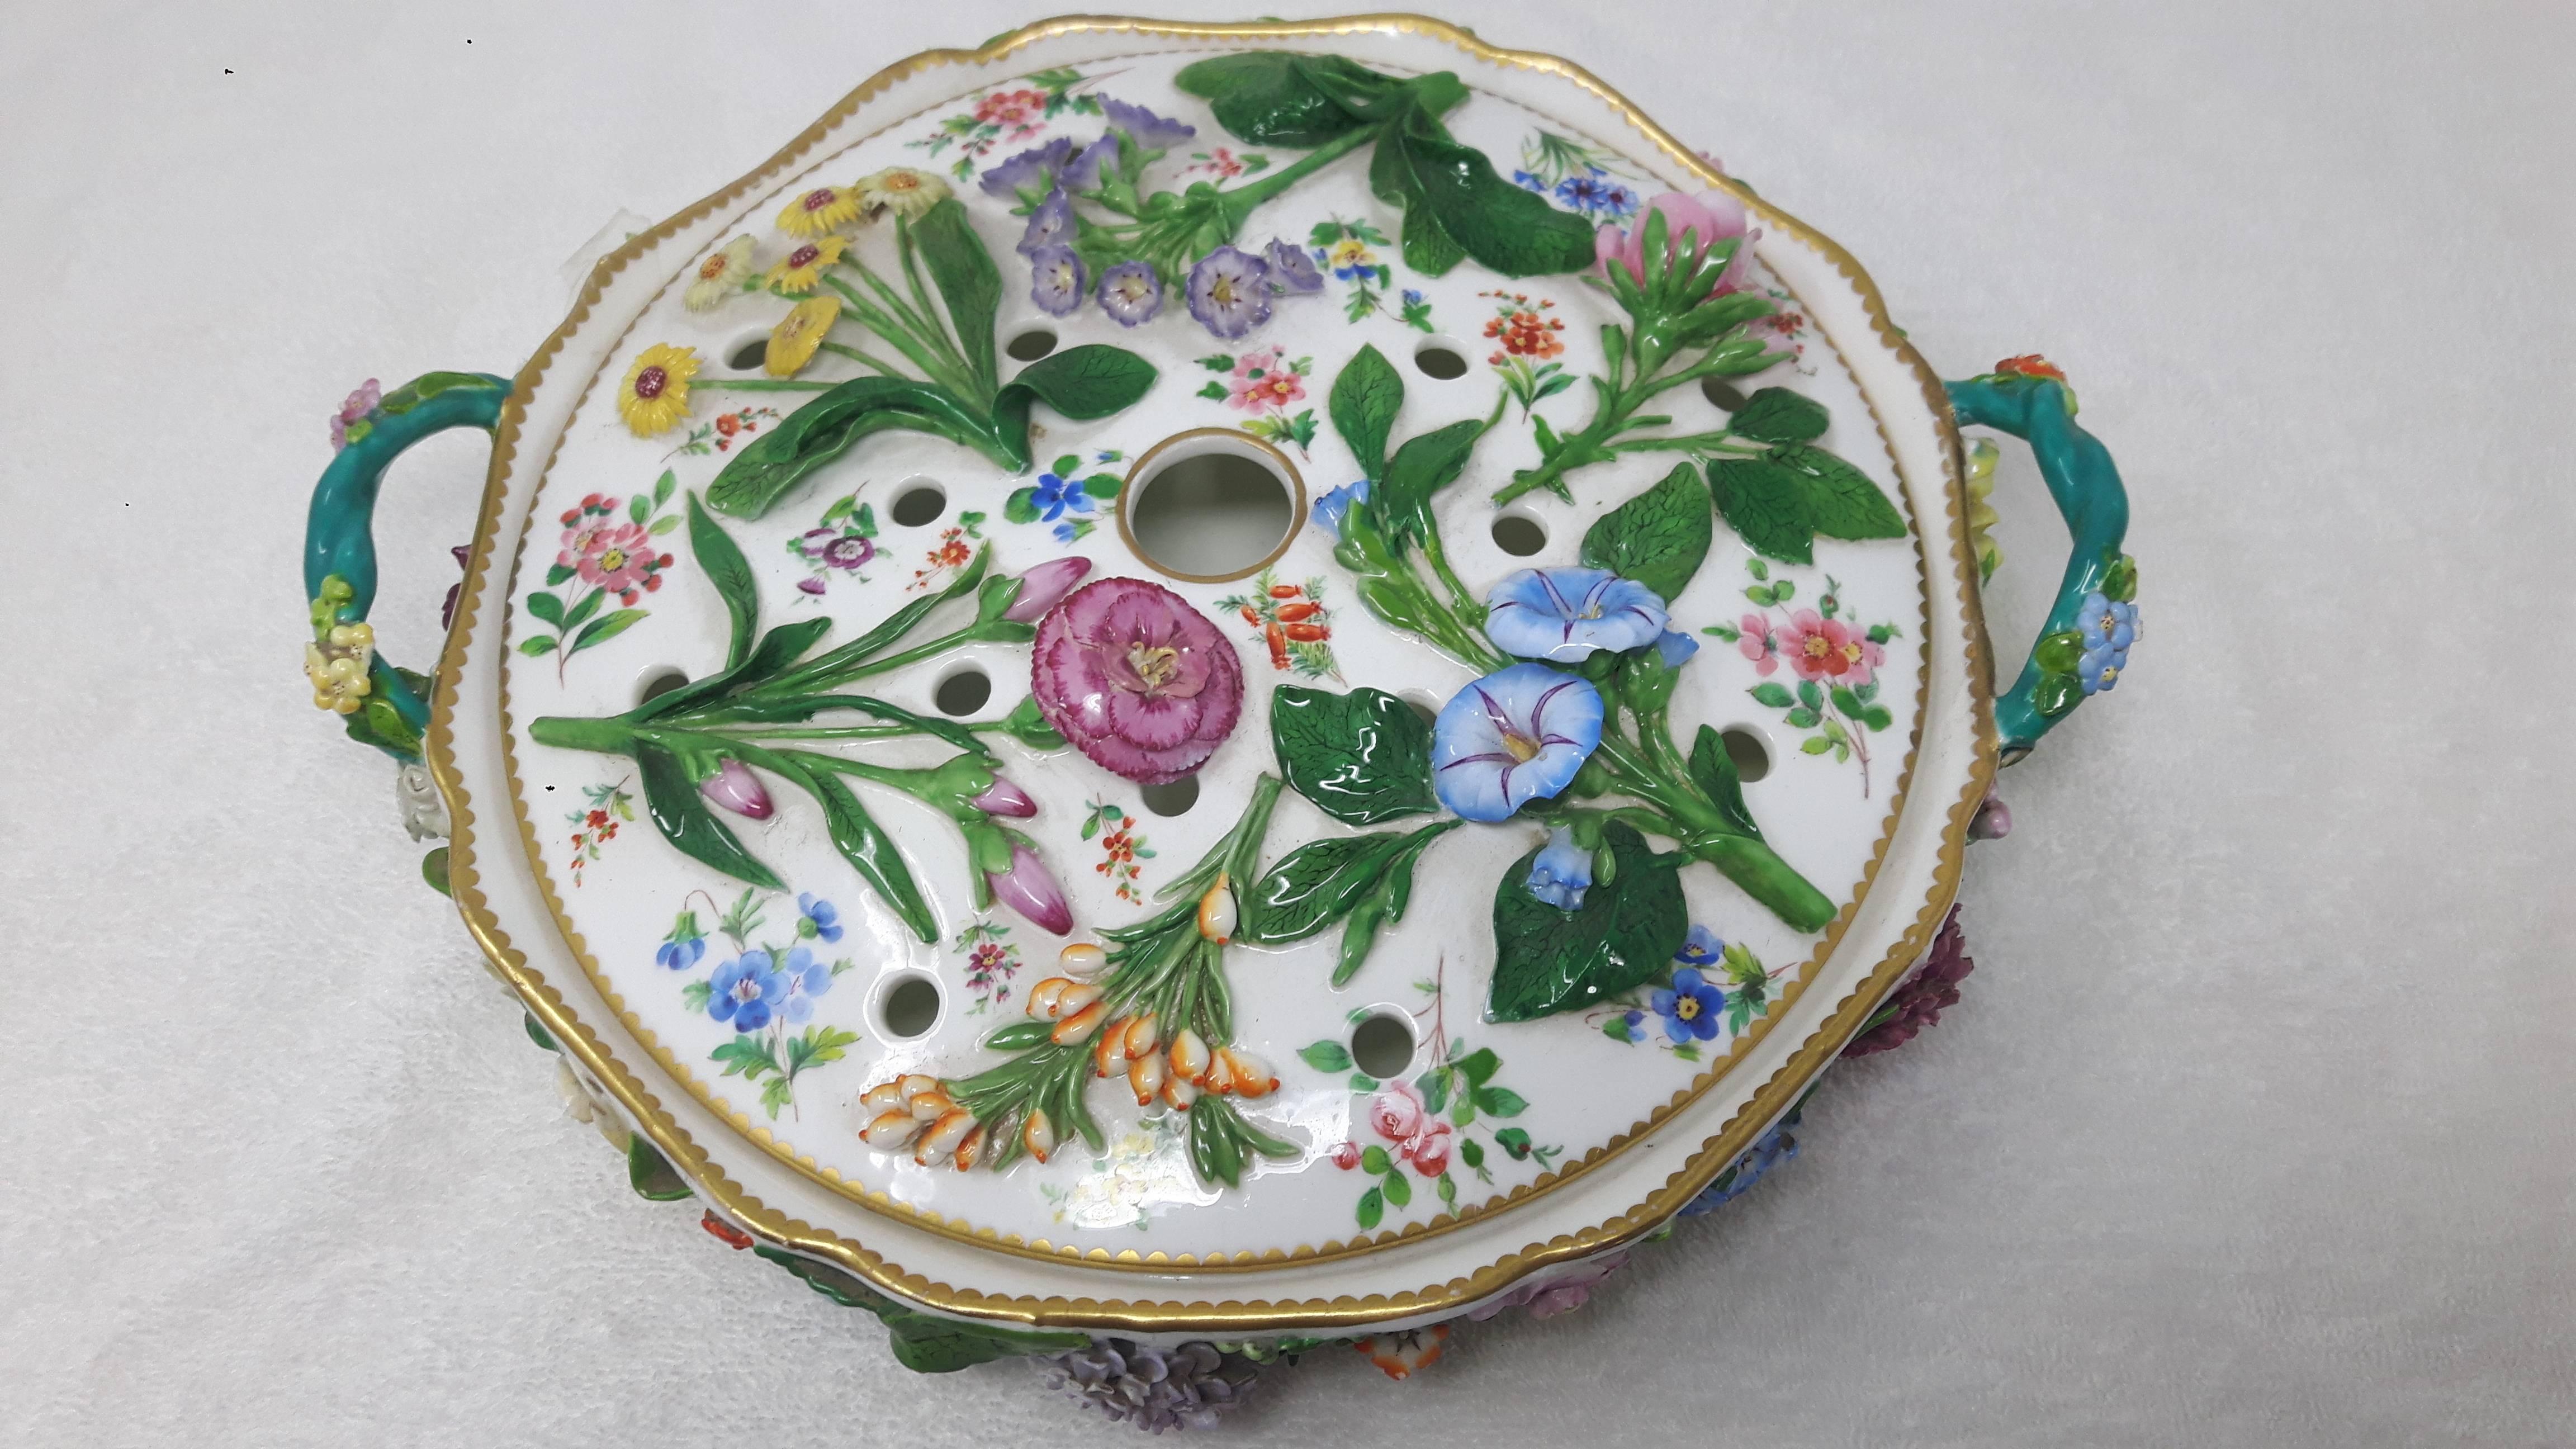 A lovely Minton pot pourri and lid in the Meissen style, encrusted with hand-moulded leaves and flowers and painted with various varieties of flowers. The handles are entwined twigs.
Minton porcelain, circa 1870.